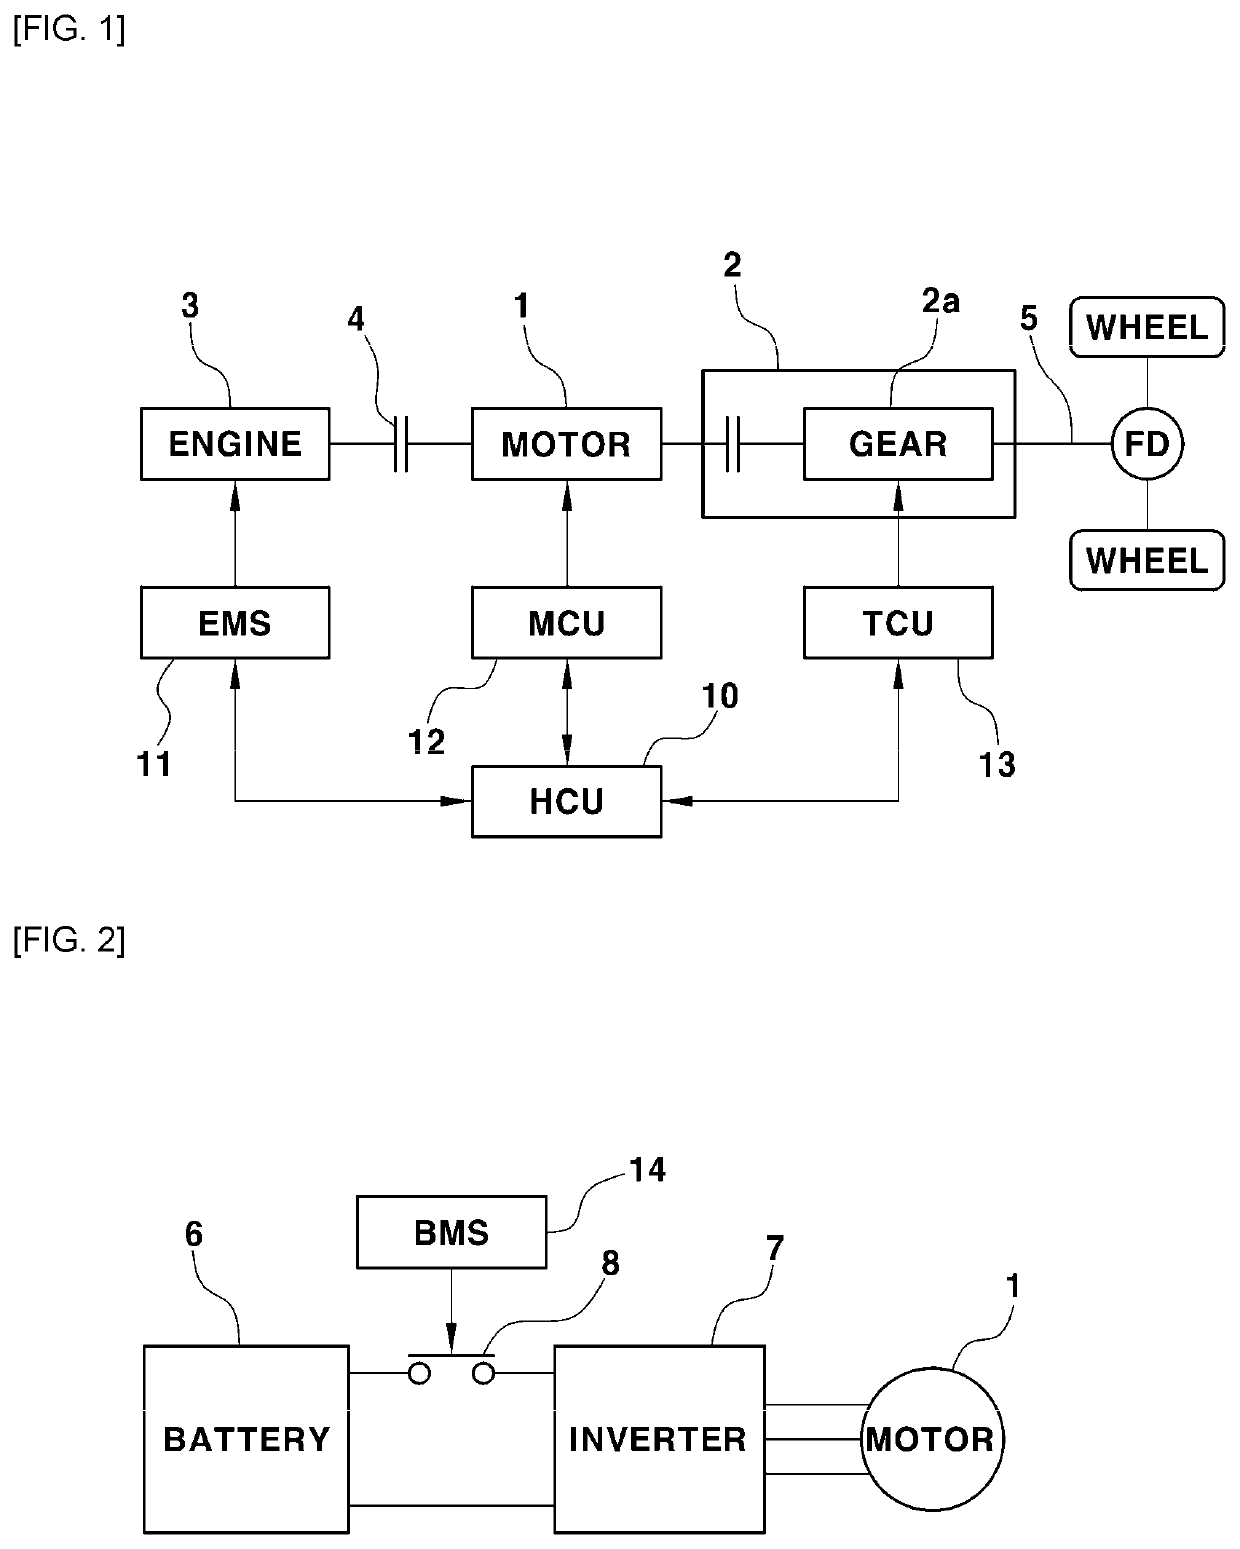 Apparatus for protecting inverter of hybrid vehicle